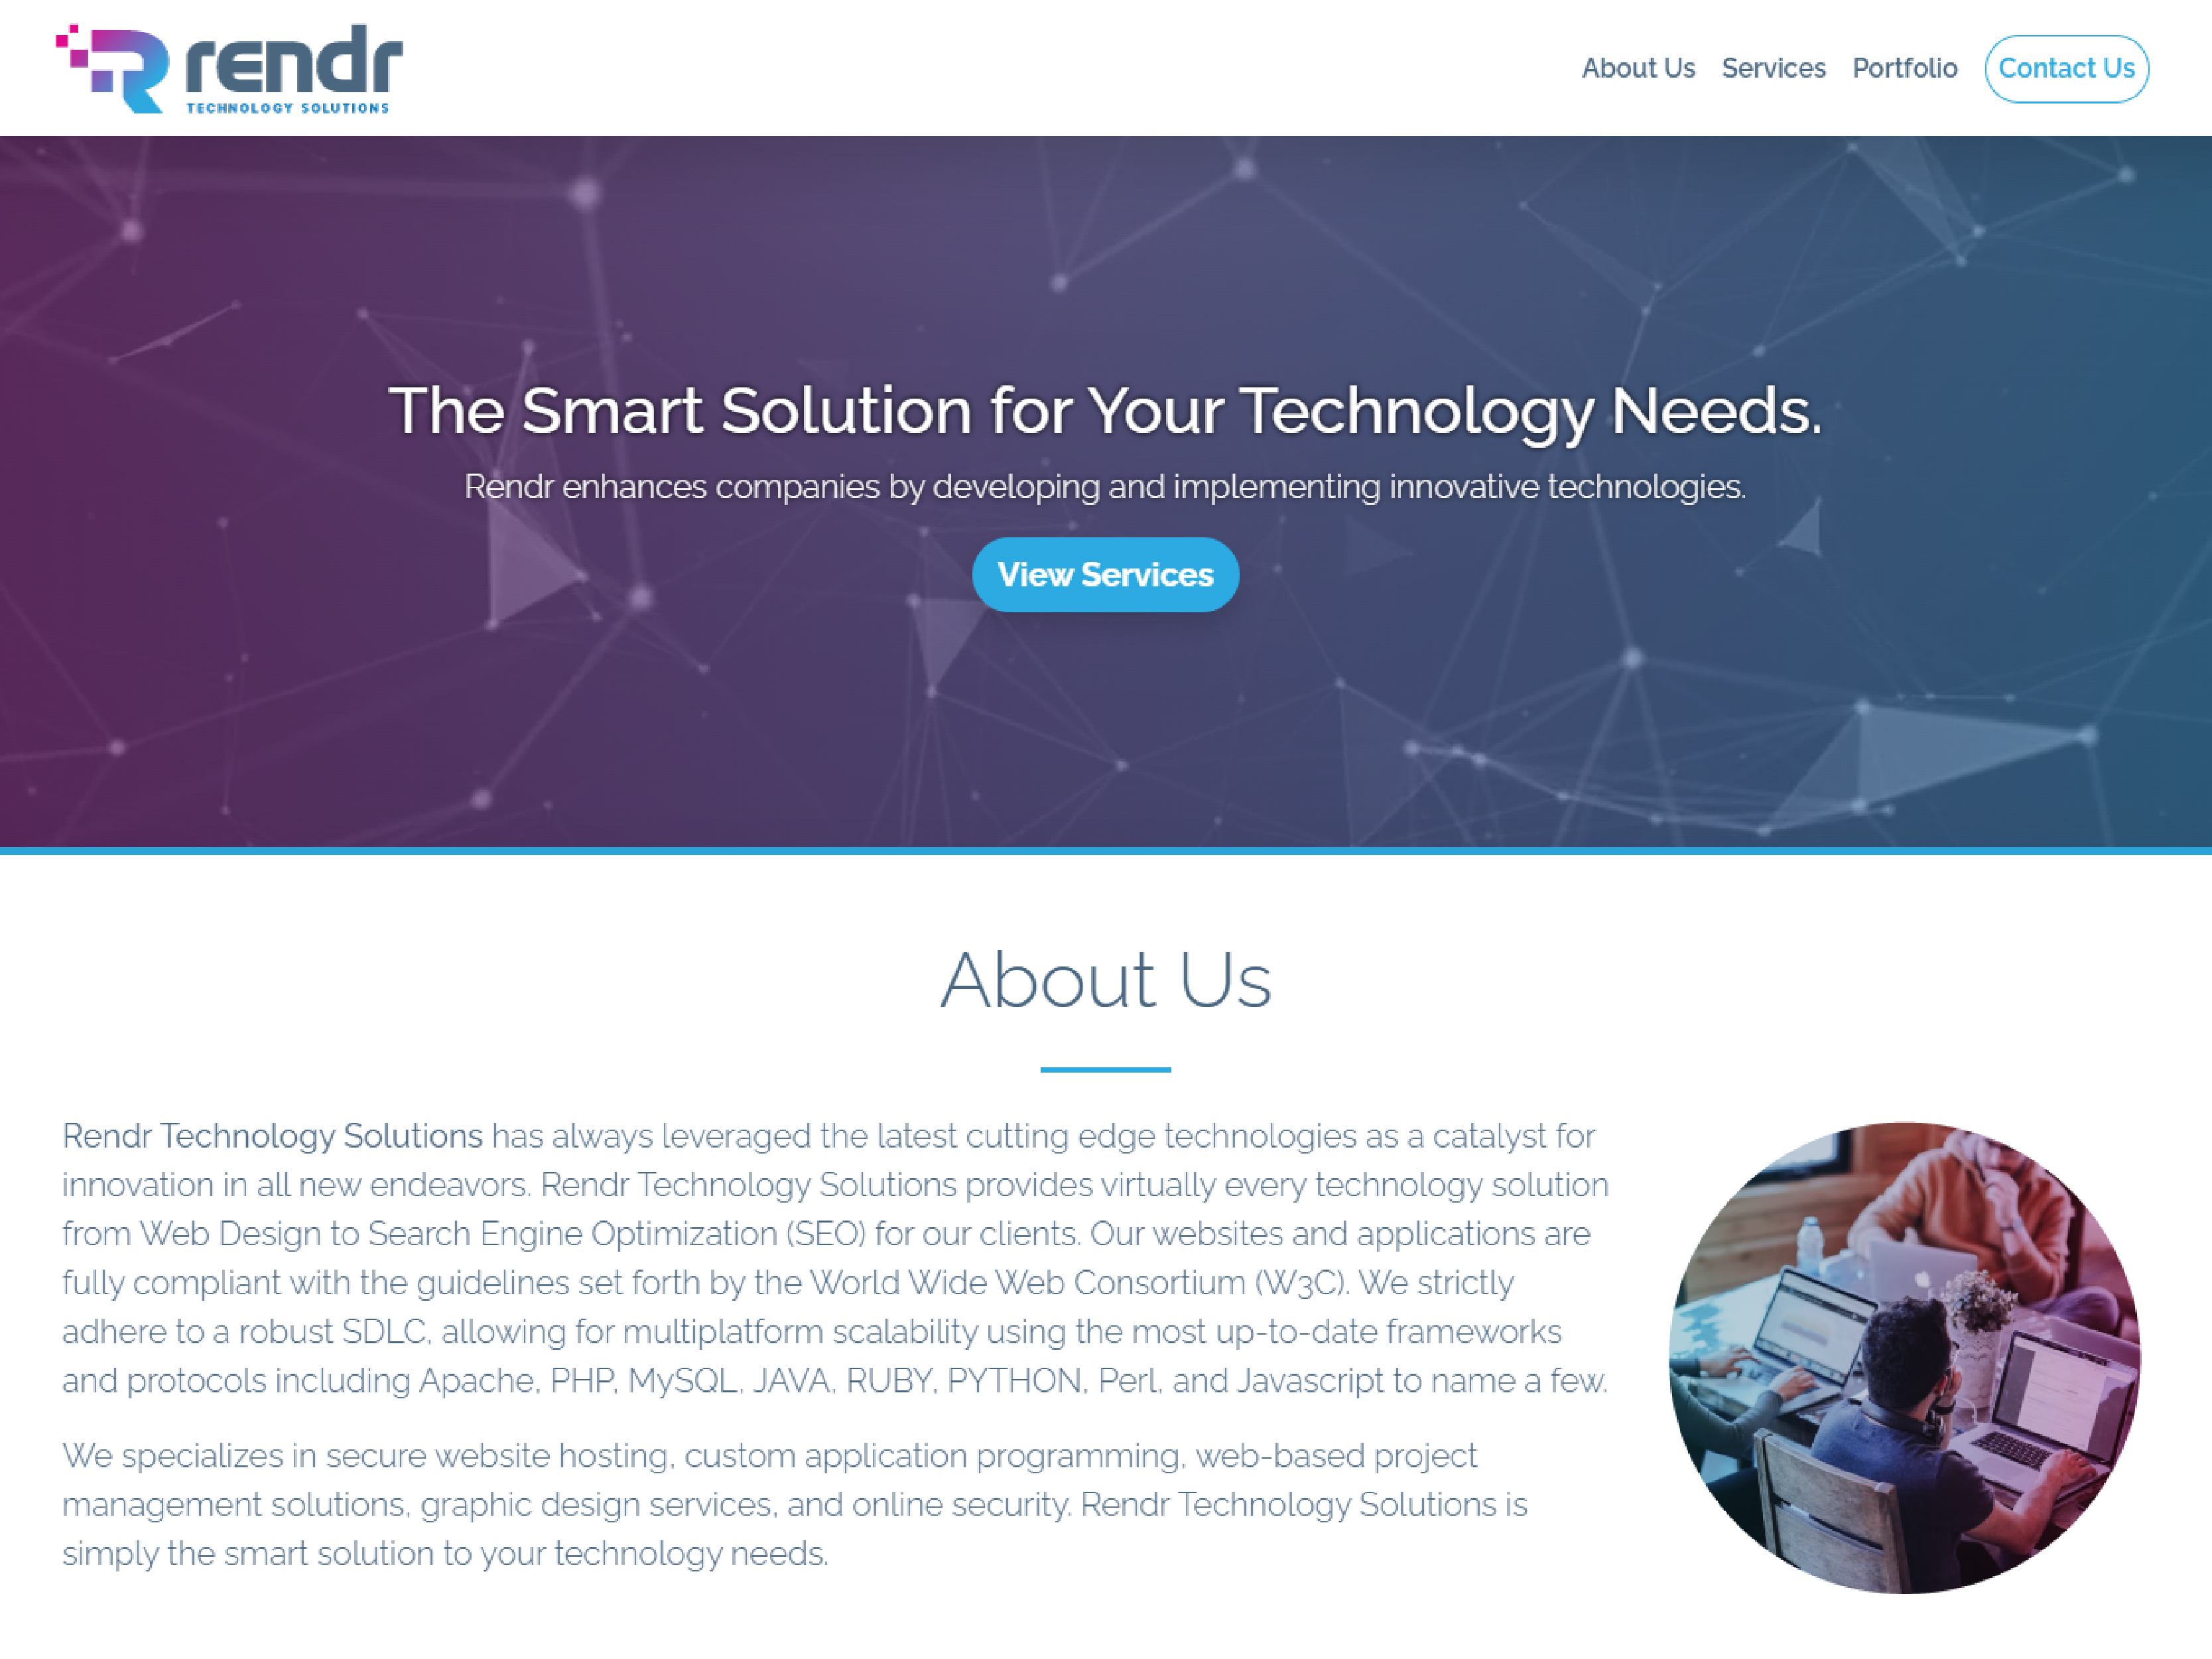 Rendr Technology Solutions